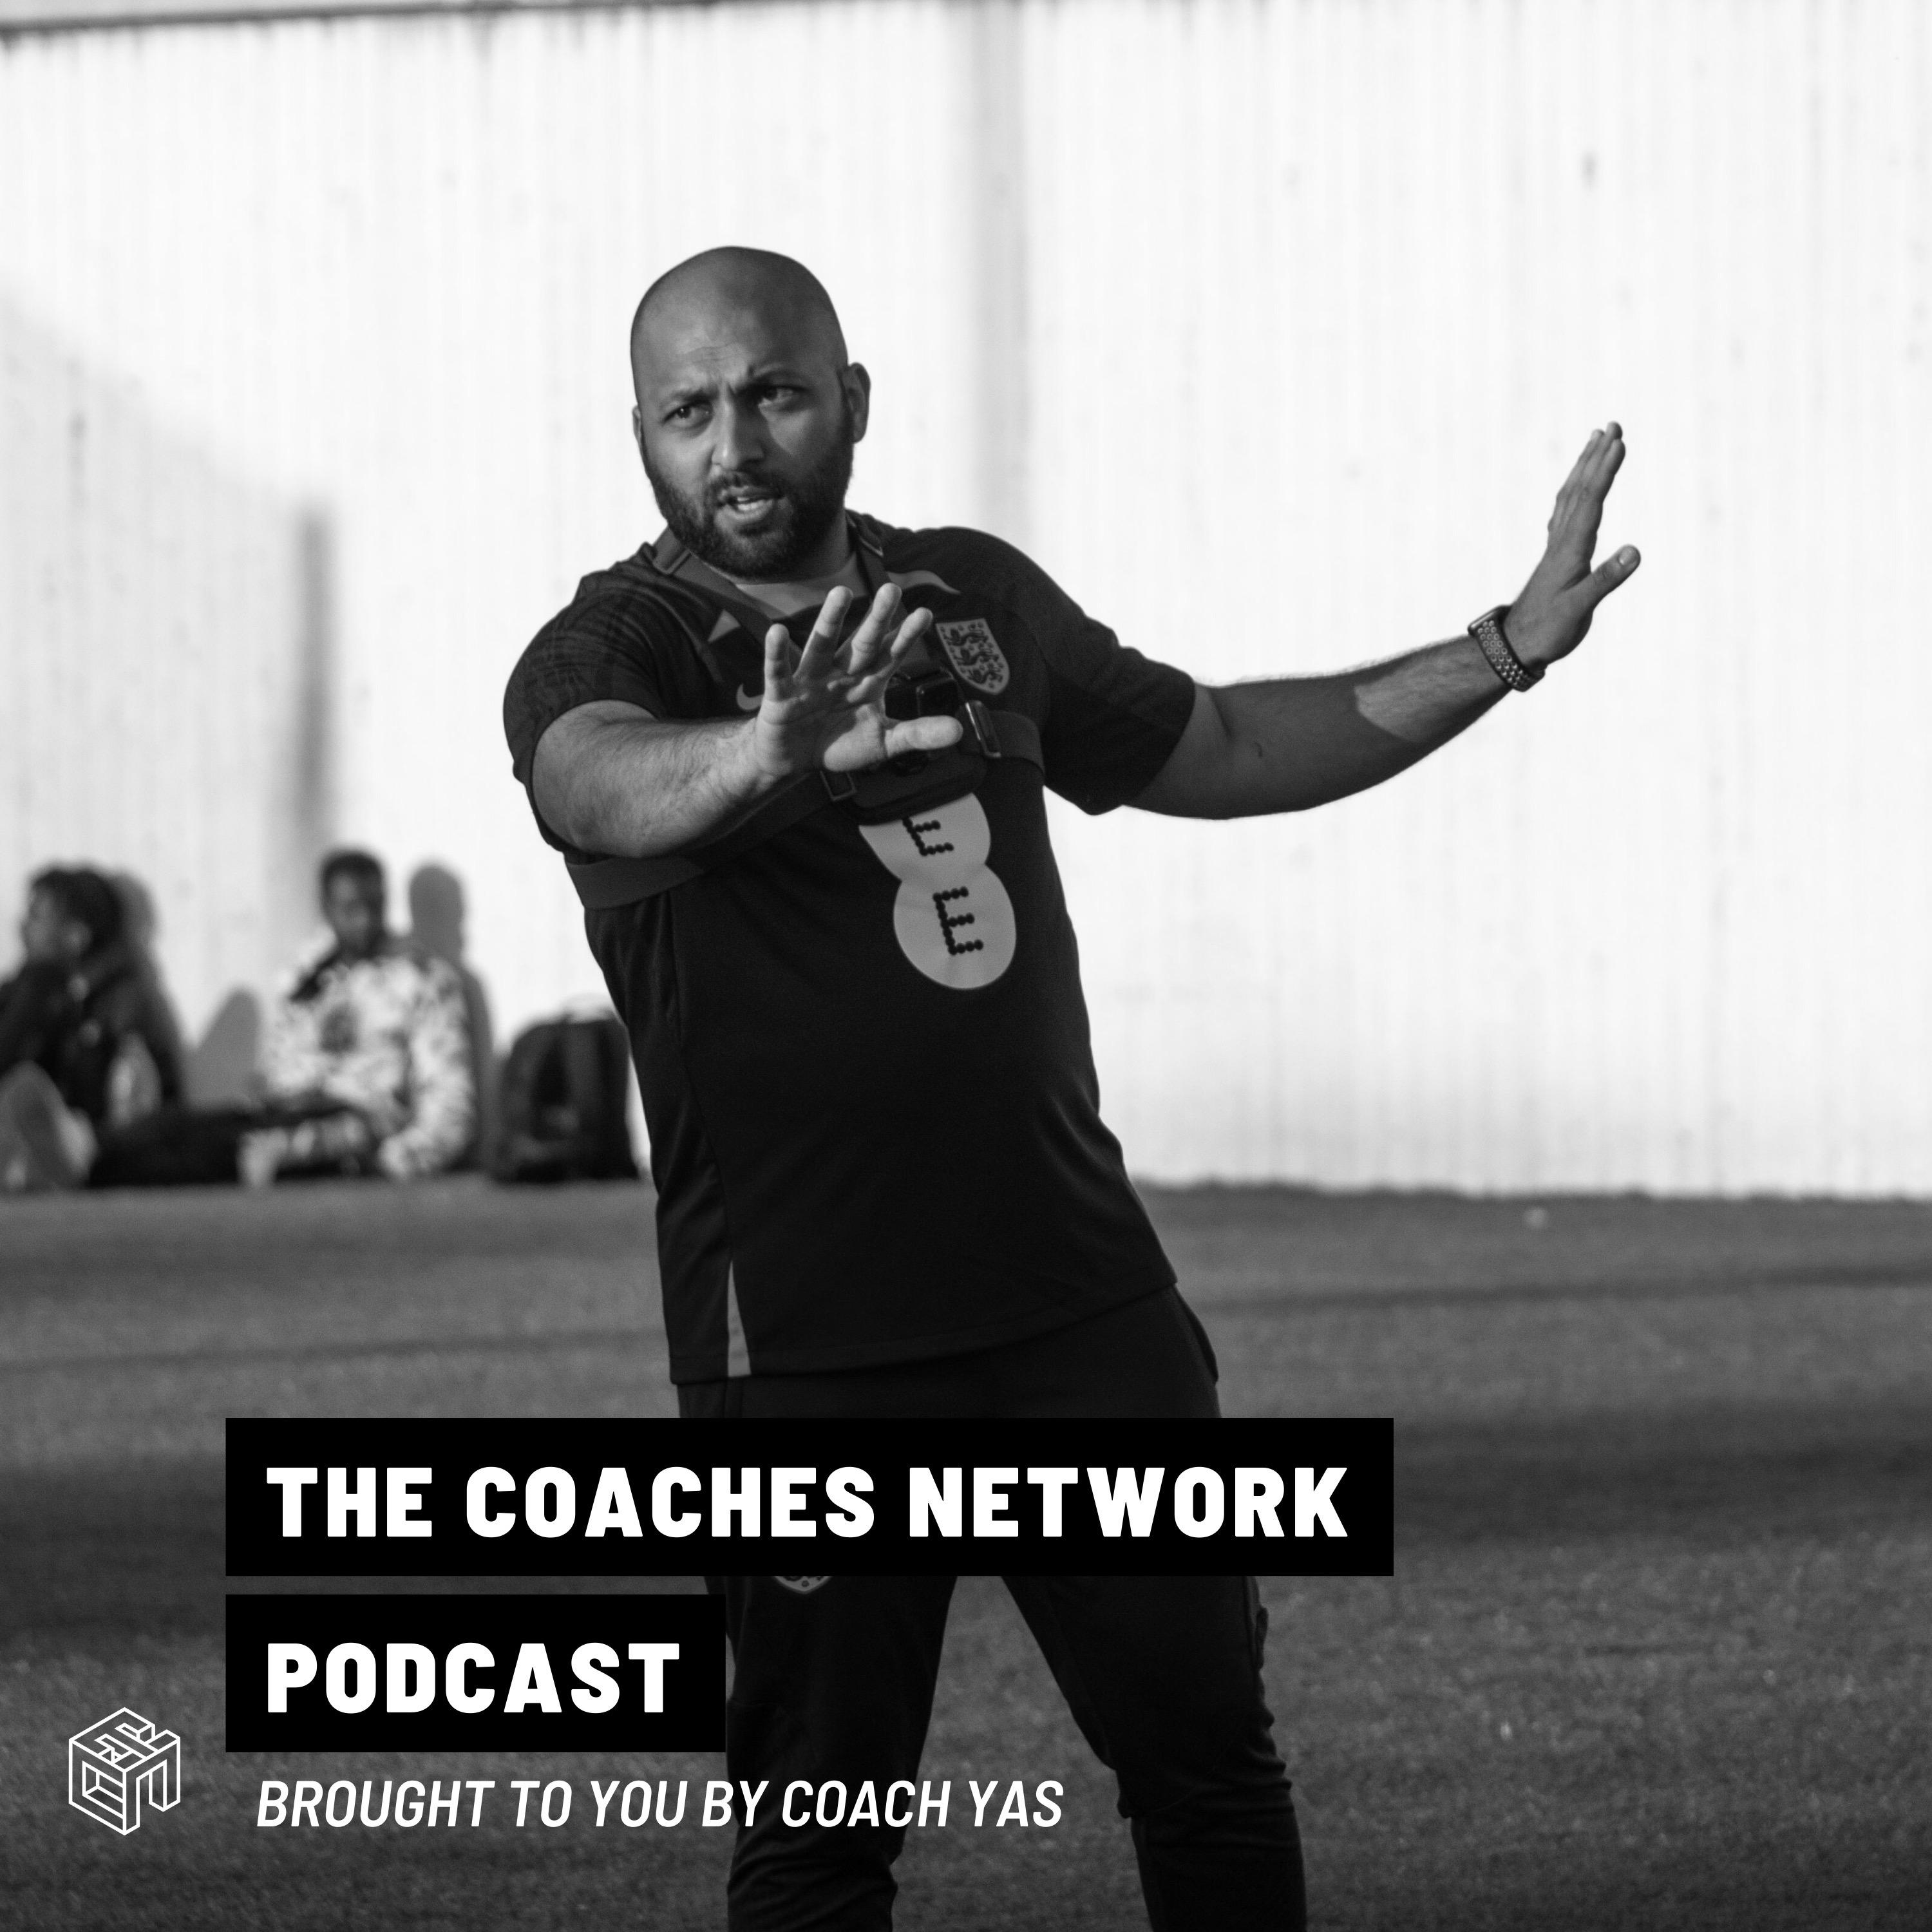 The Coaches Network Podcast